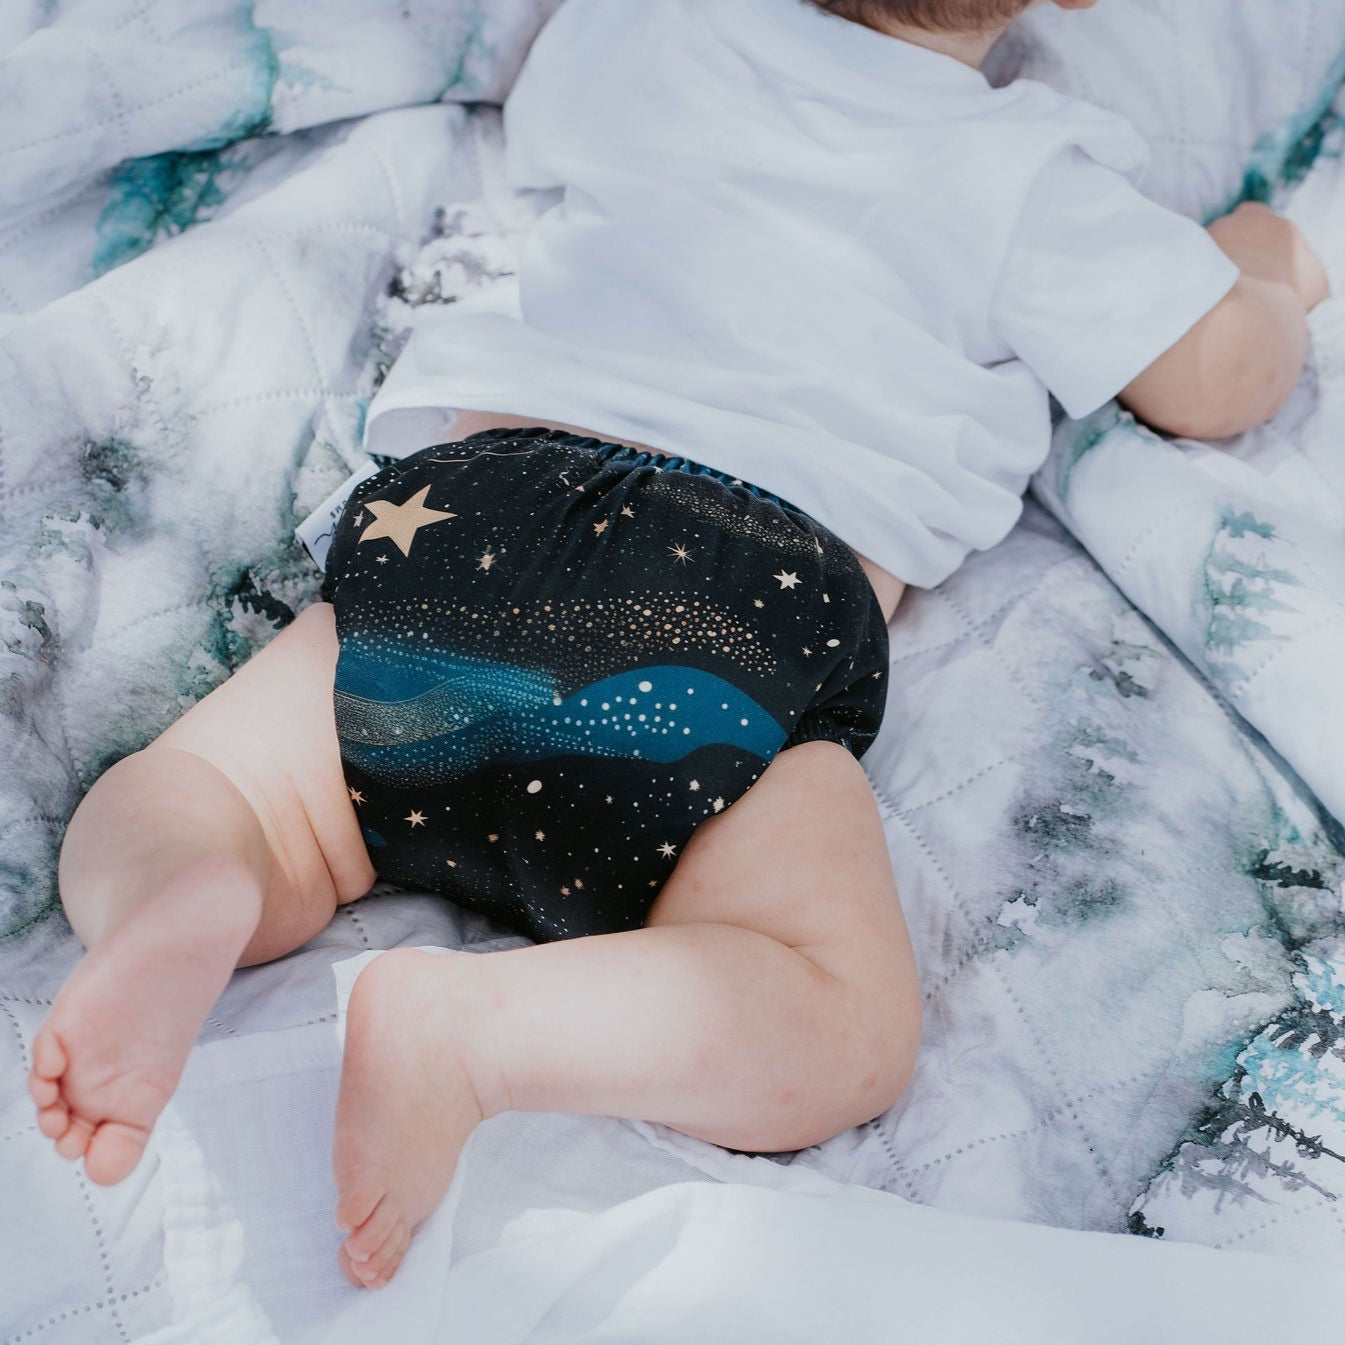 Velcro PIXIE One Size Fits Most Cloth Nappy - Cosmic